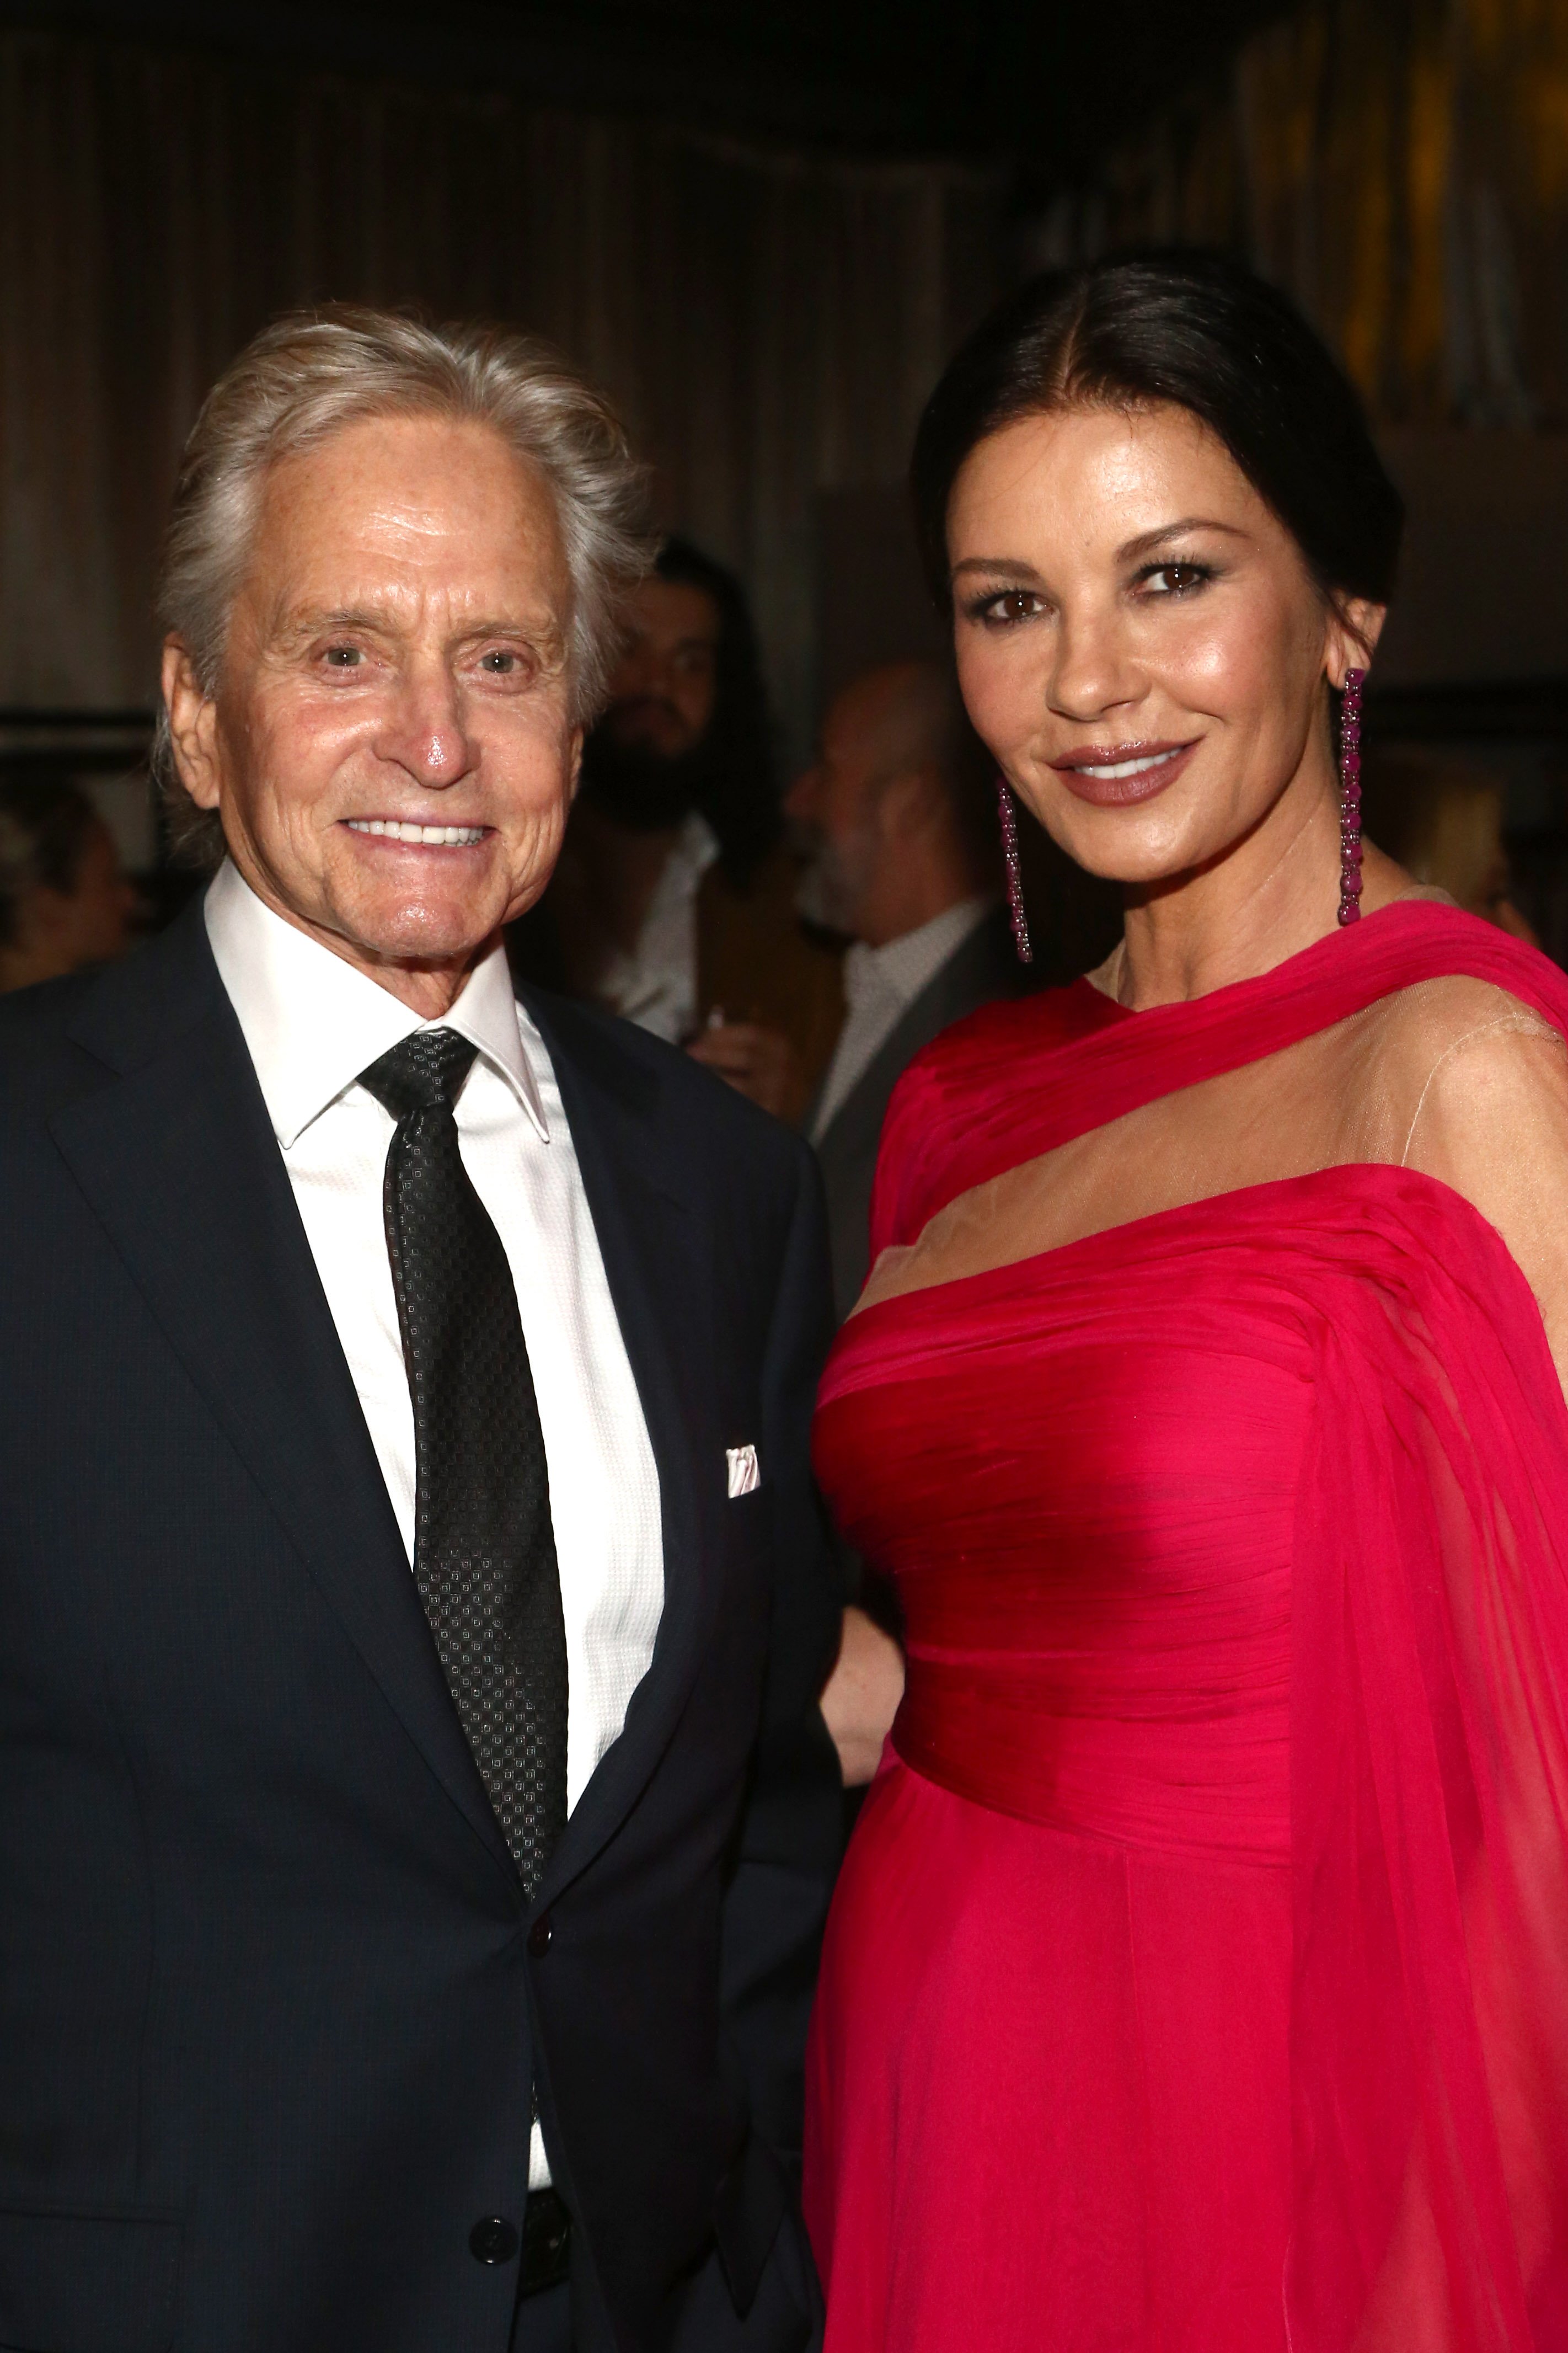 Michael Douglas and Catherine Zeta-Jones attend the Netflix's 71st Emmy Awards After Party on September 22, 2019, in Hollywood, California. | Source: Getty Images.